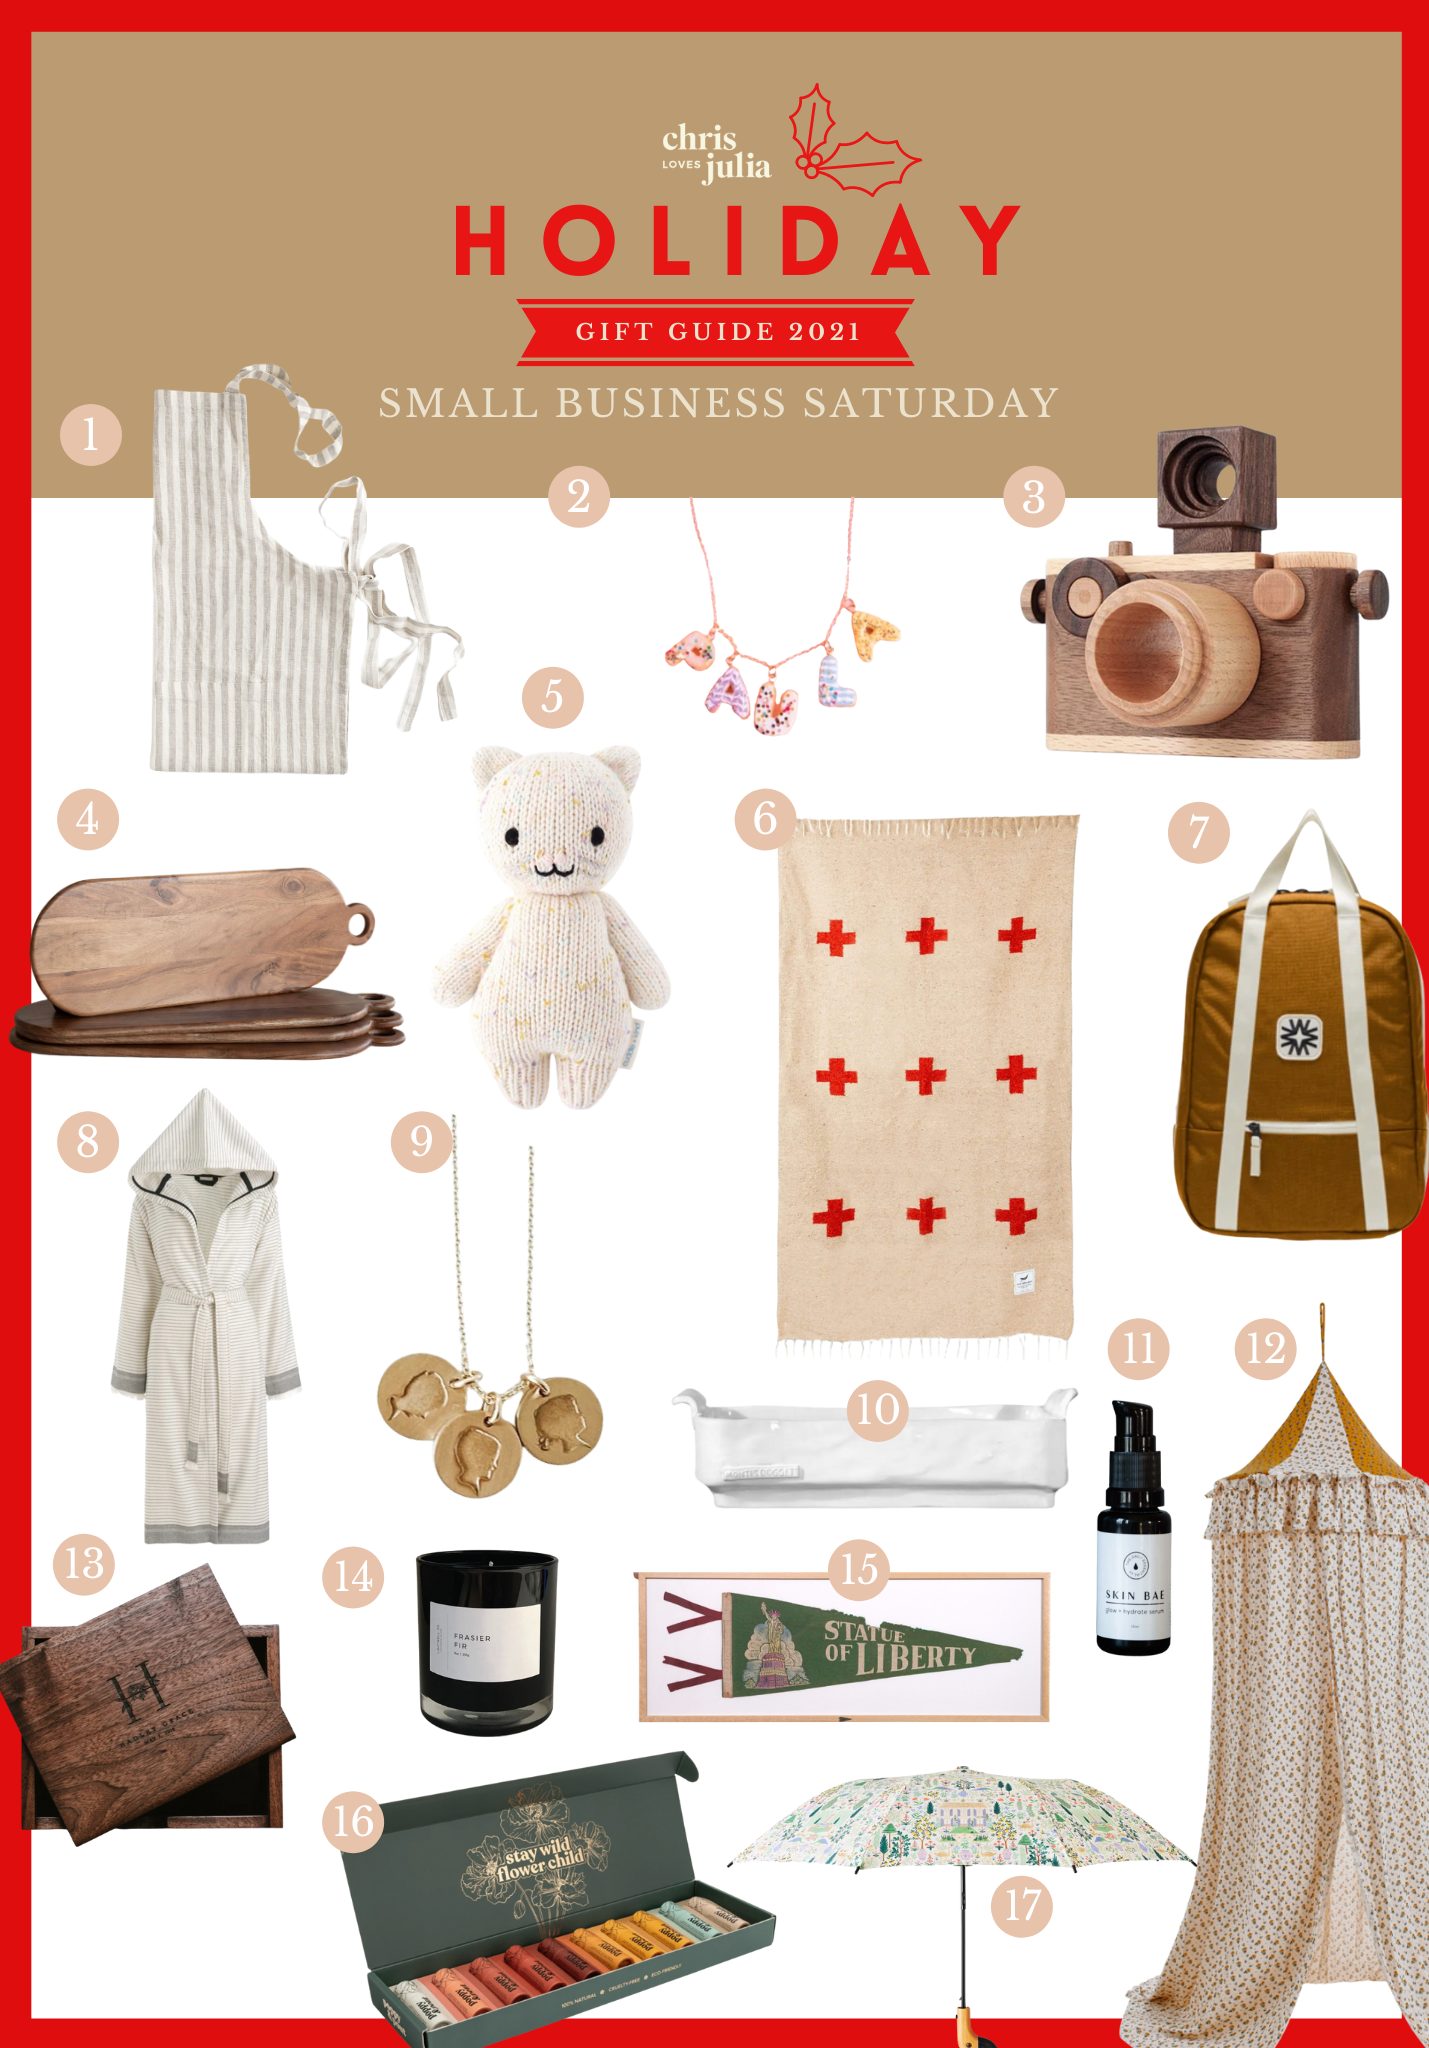 Gift Guide For Her (& Gifts Supporting Small, Local Biz